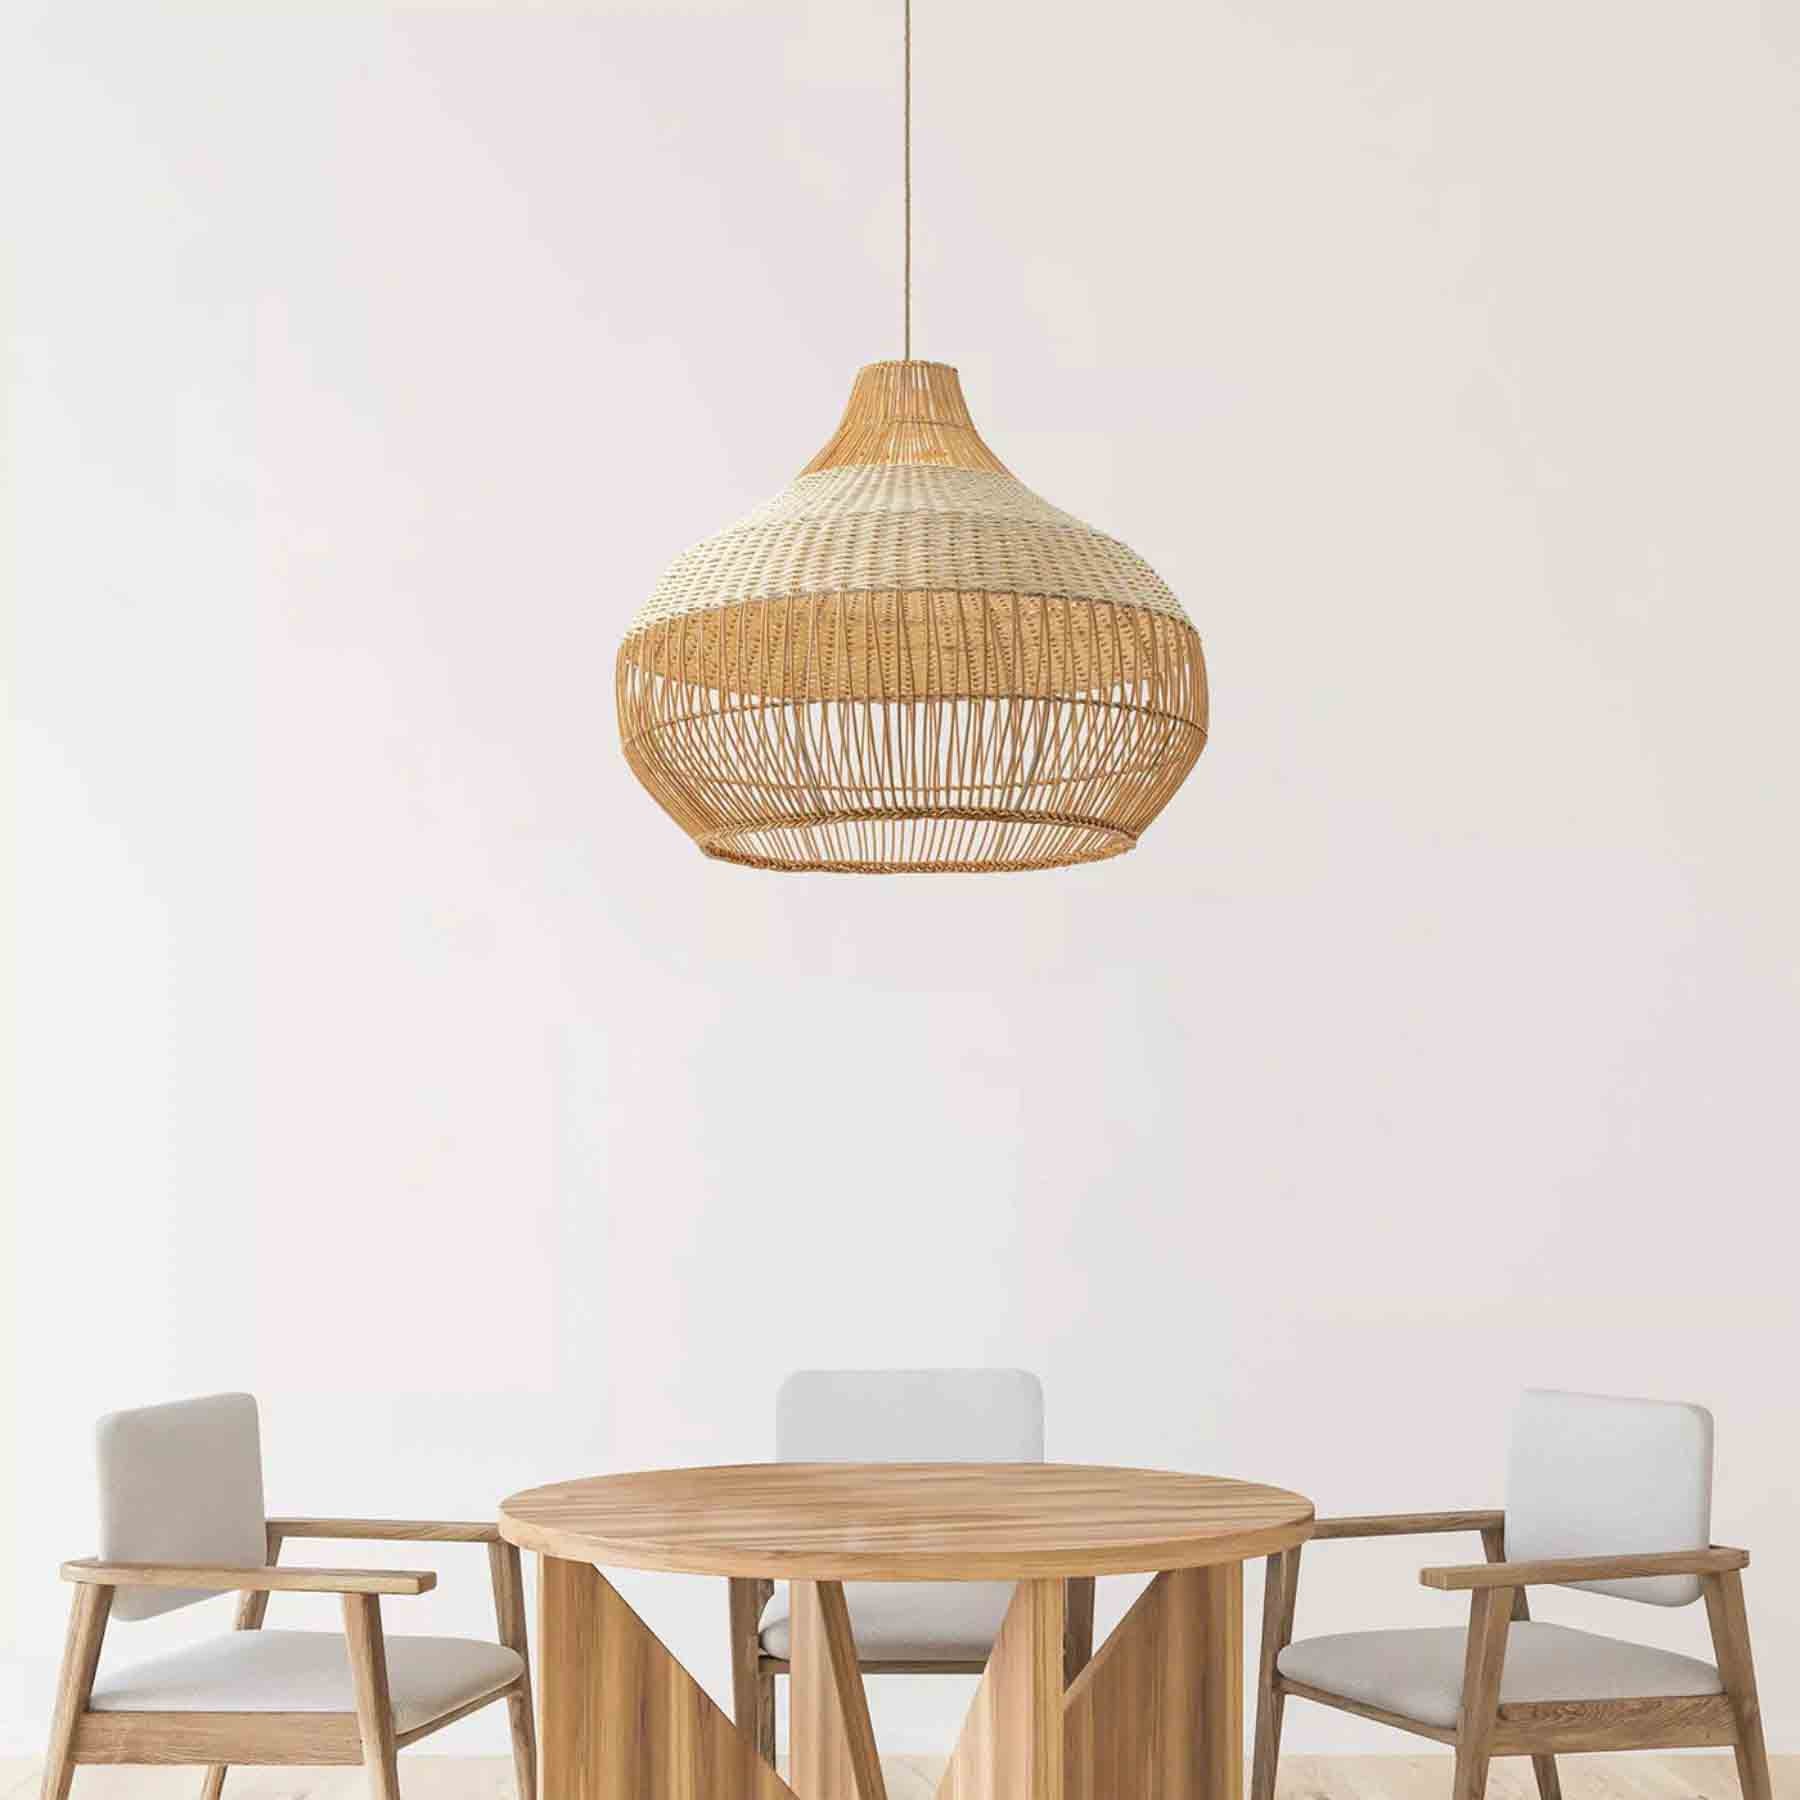 the versatility of neutral colors contributes to why rattan pendant lights effortlessly complement various furniture styles